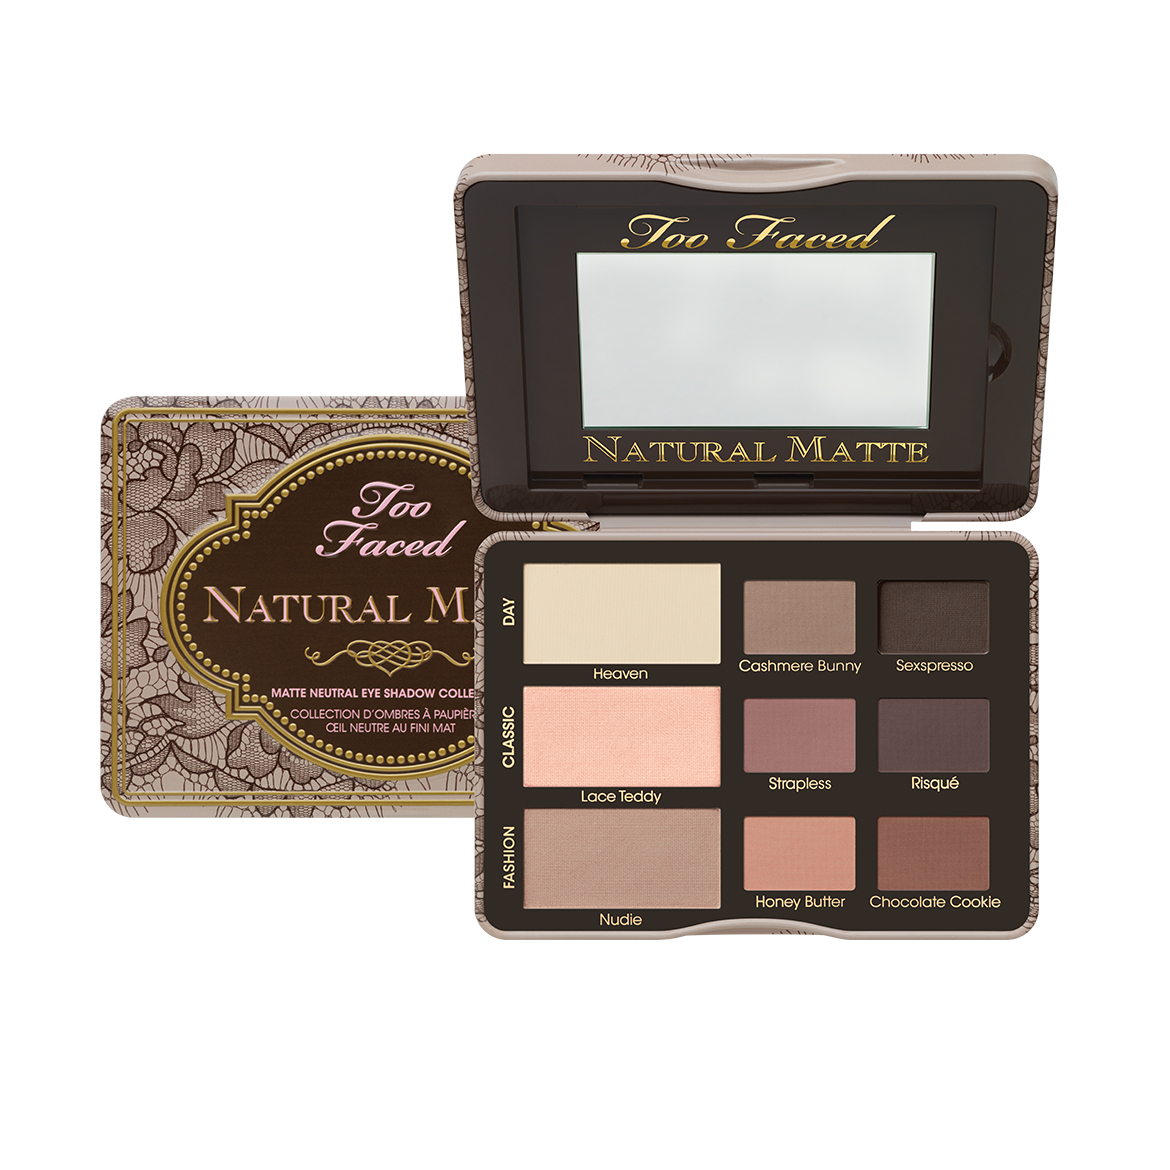 w Too Faced Natural Matte Eye Palette - best eyeshadow palettes for beginners